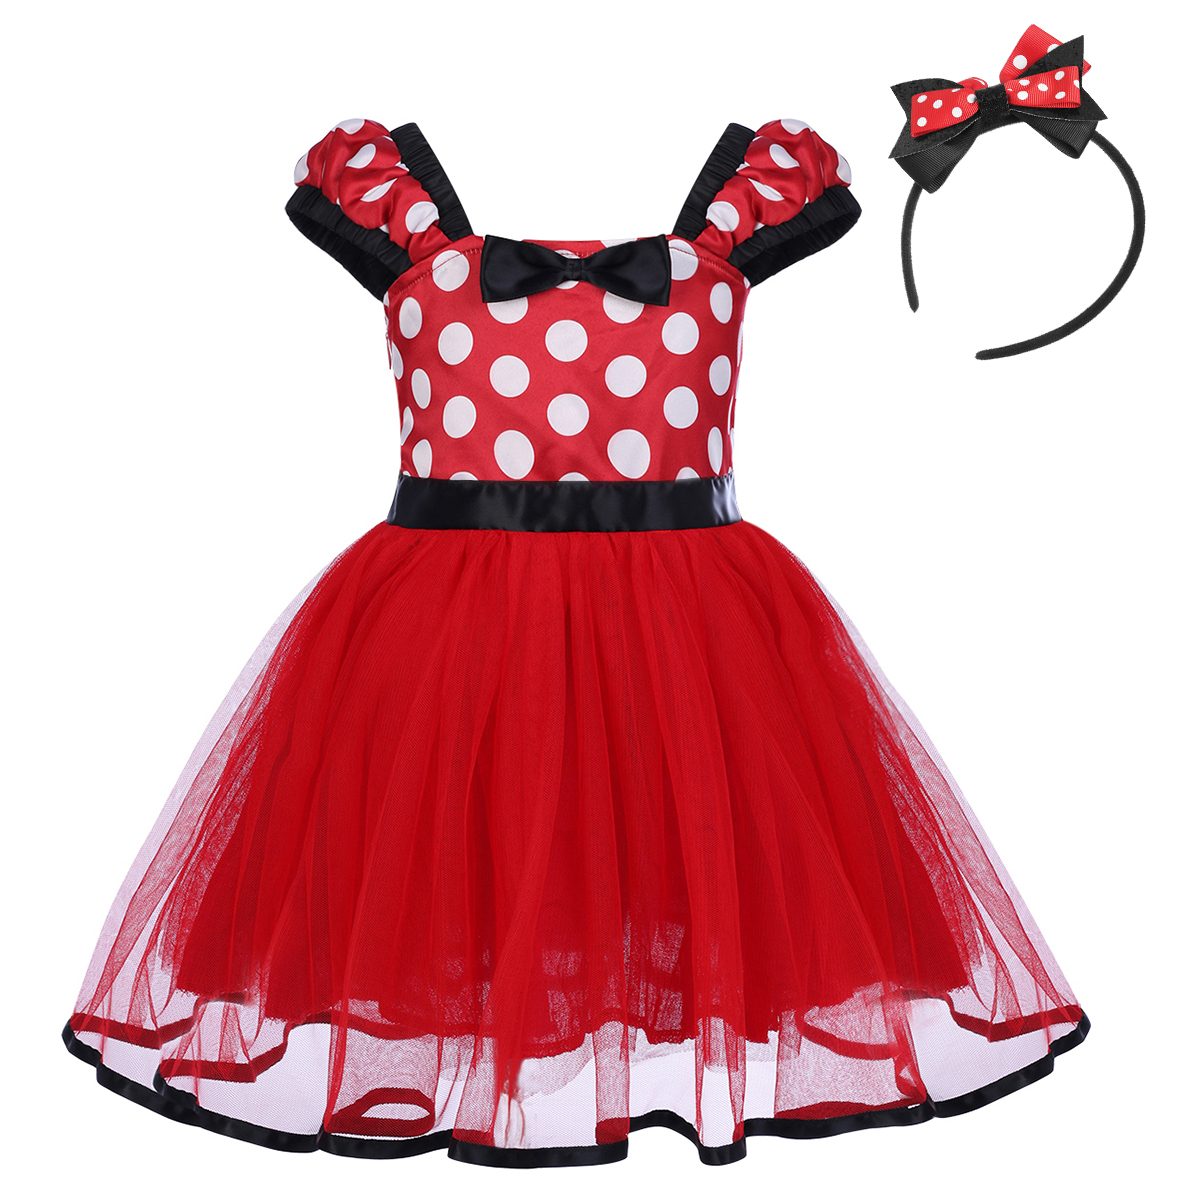 IBTOM CASTLE Toddler Girls Polka Dots Princess Party Cosplay Pageant Fancy Dress up Birthday Tutu Dress + Ears Headband Outfit Set 3-4 Years Red - image 2 of 8